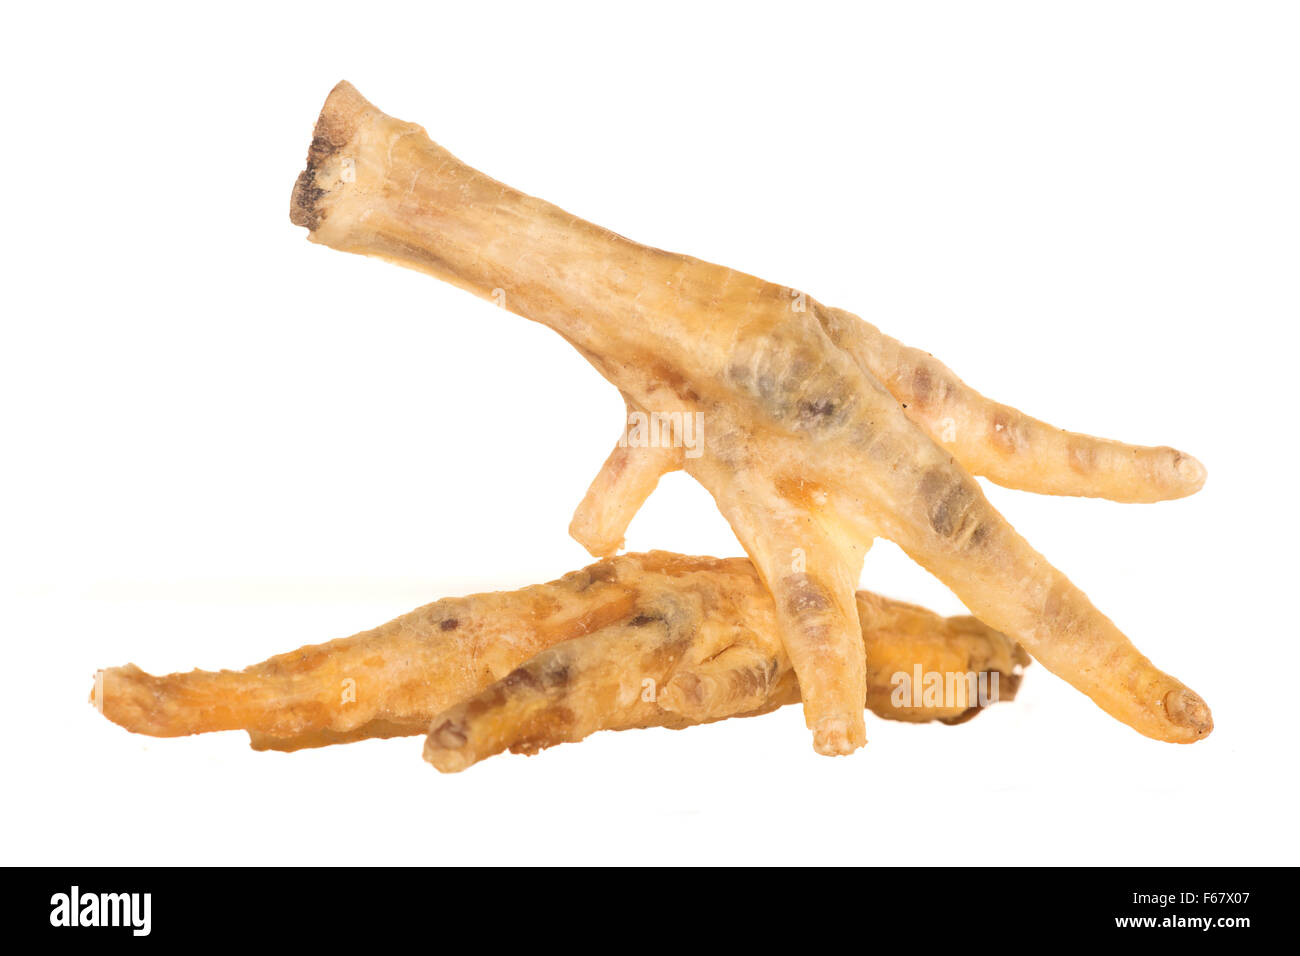 Pile of chicken feet dog food cutout Stock Photo